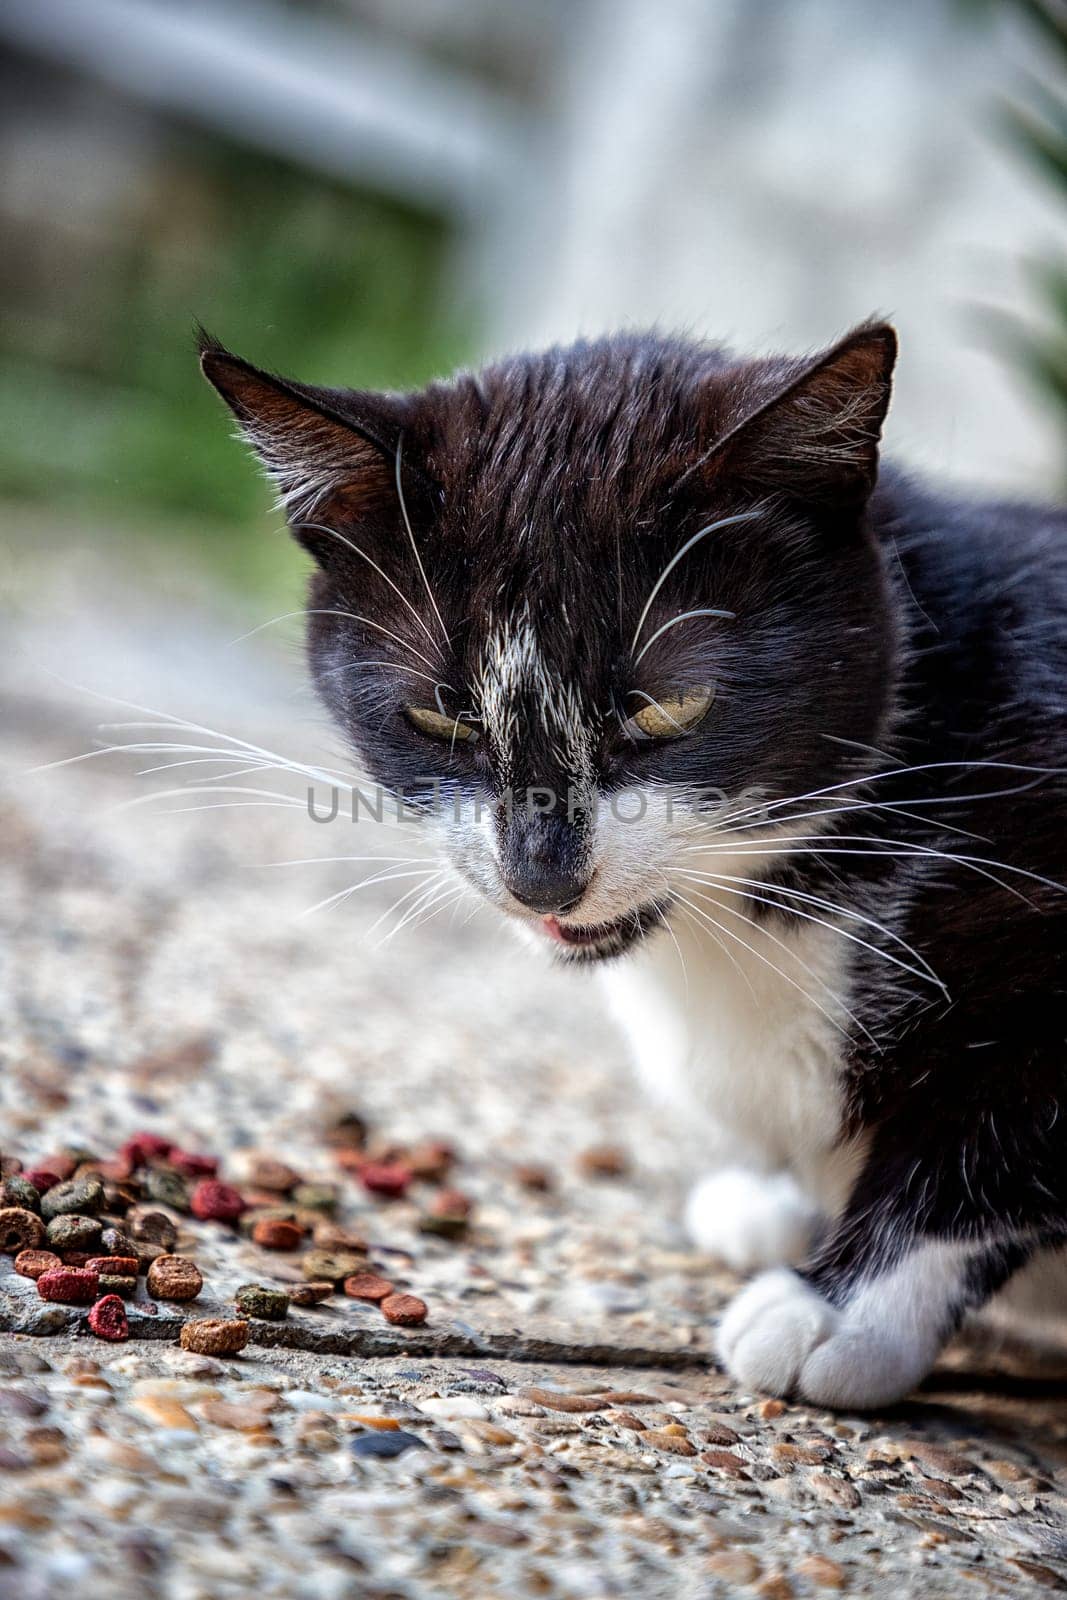 Close up of cat eating granules in the garden, with blurred background.